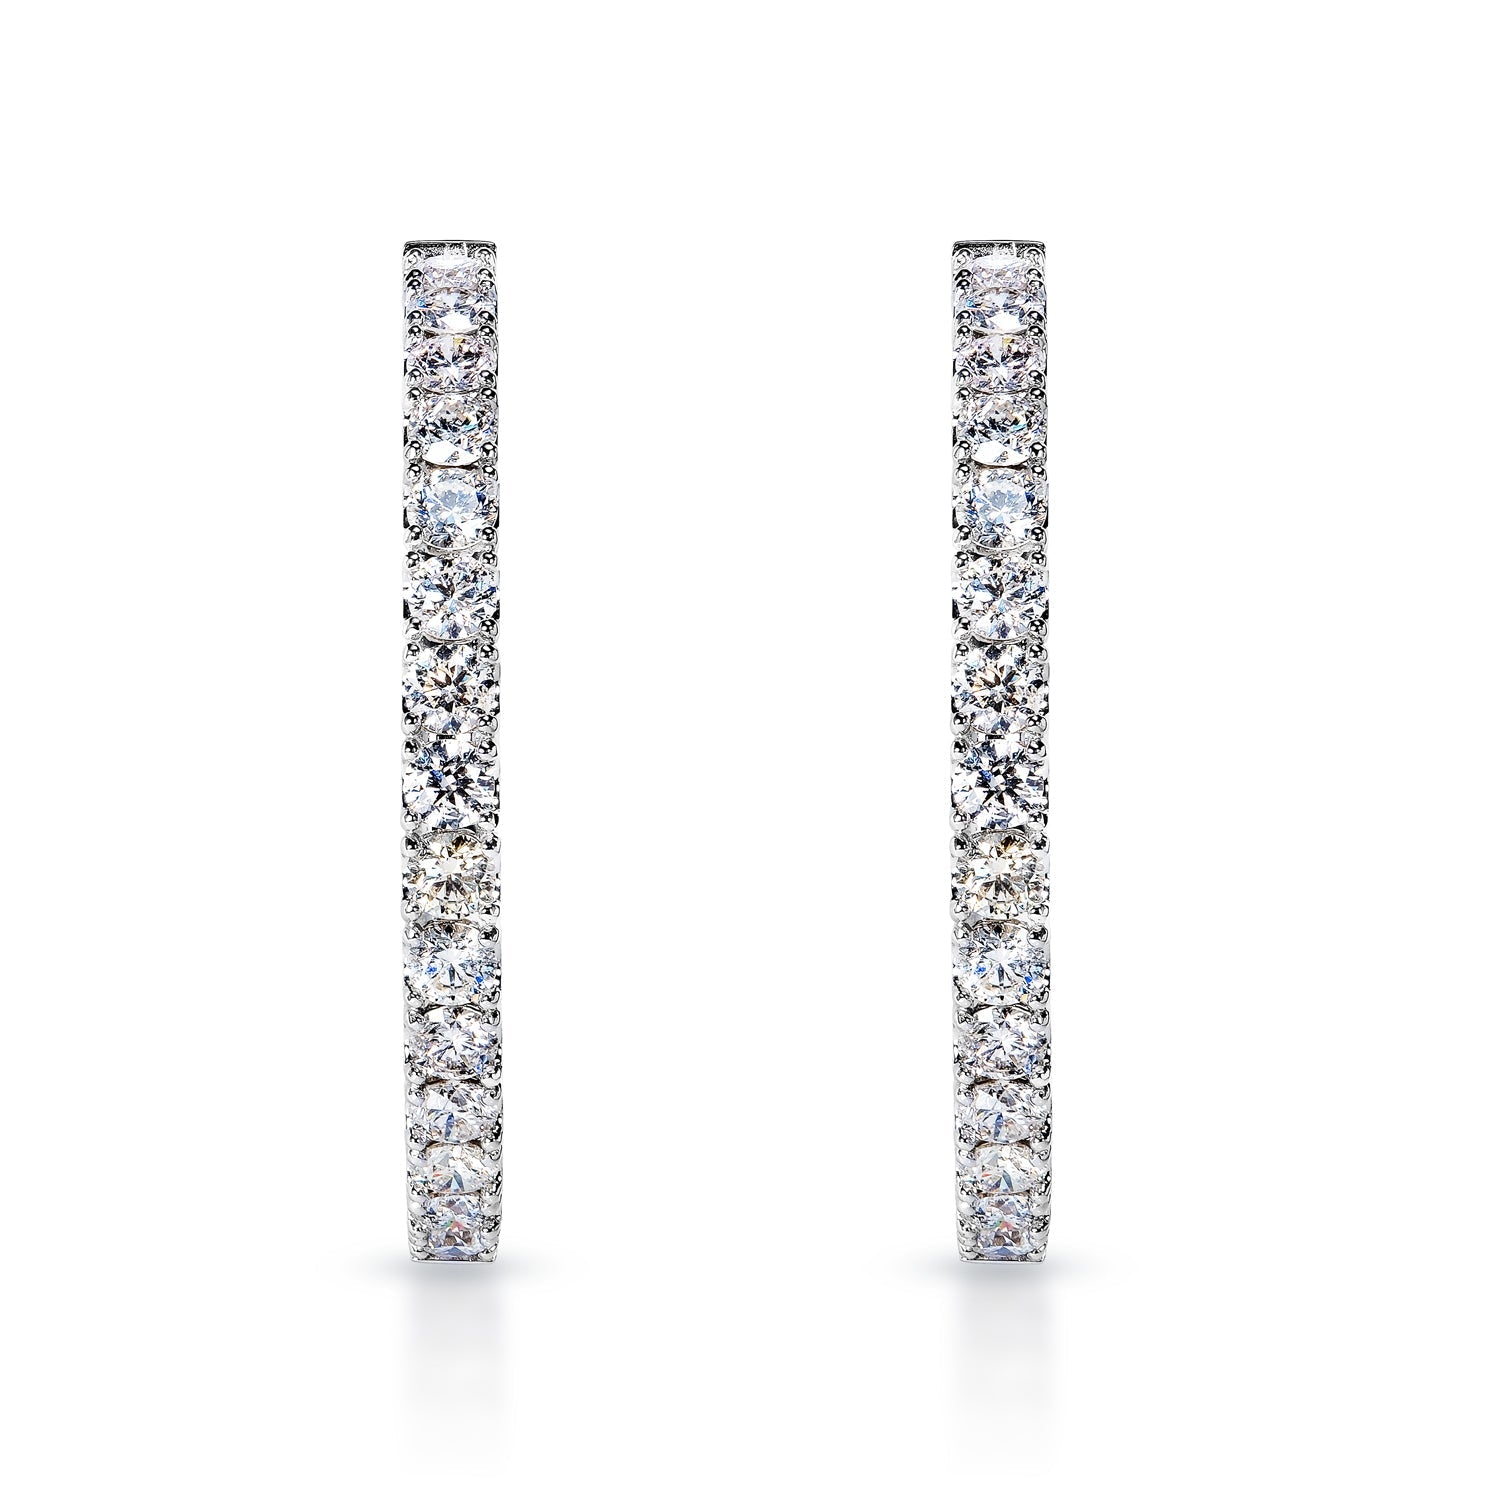 Finley 11 Carat Round Brilliant Cut Earth Mined Diamond Hoop Earrings in 14 Karat White Gold Front View